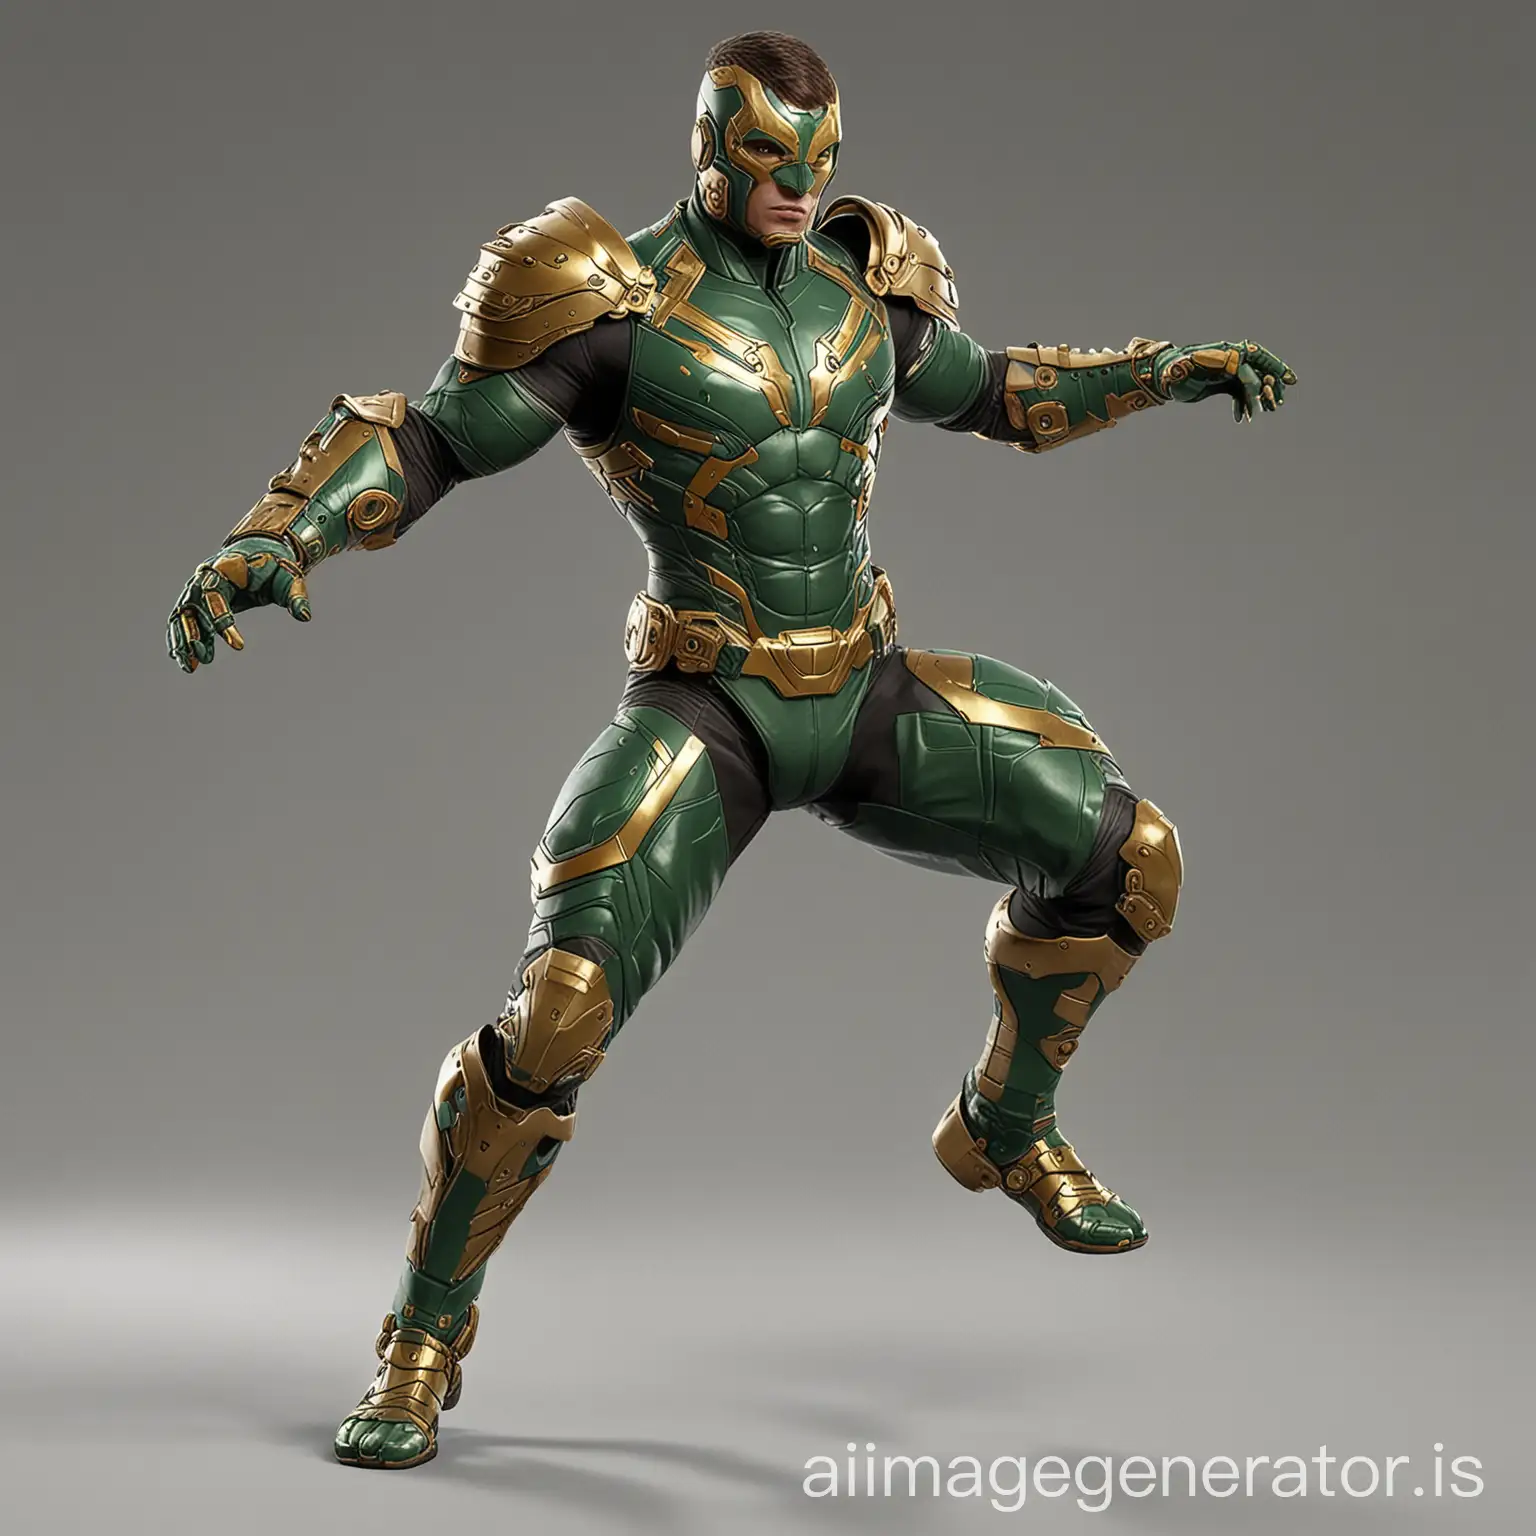 Muscular-Male-Superhero-in-Combat-Pose-with-HiTech-Armor-and-Green-Facemask